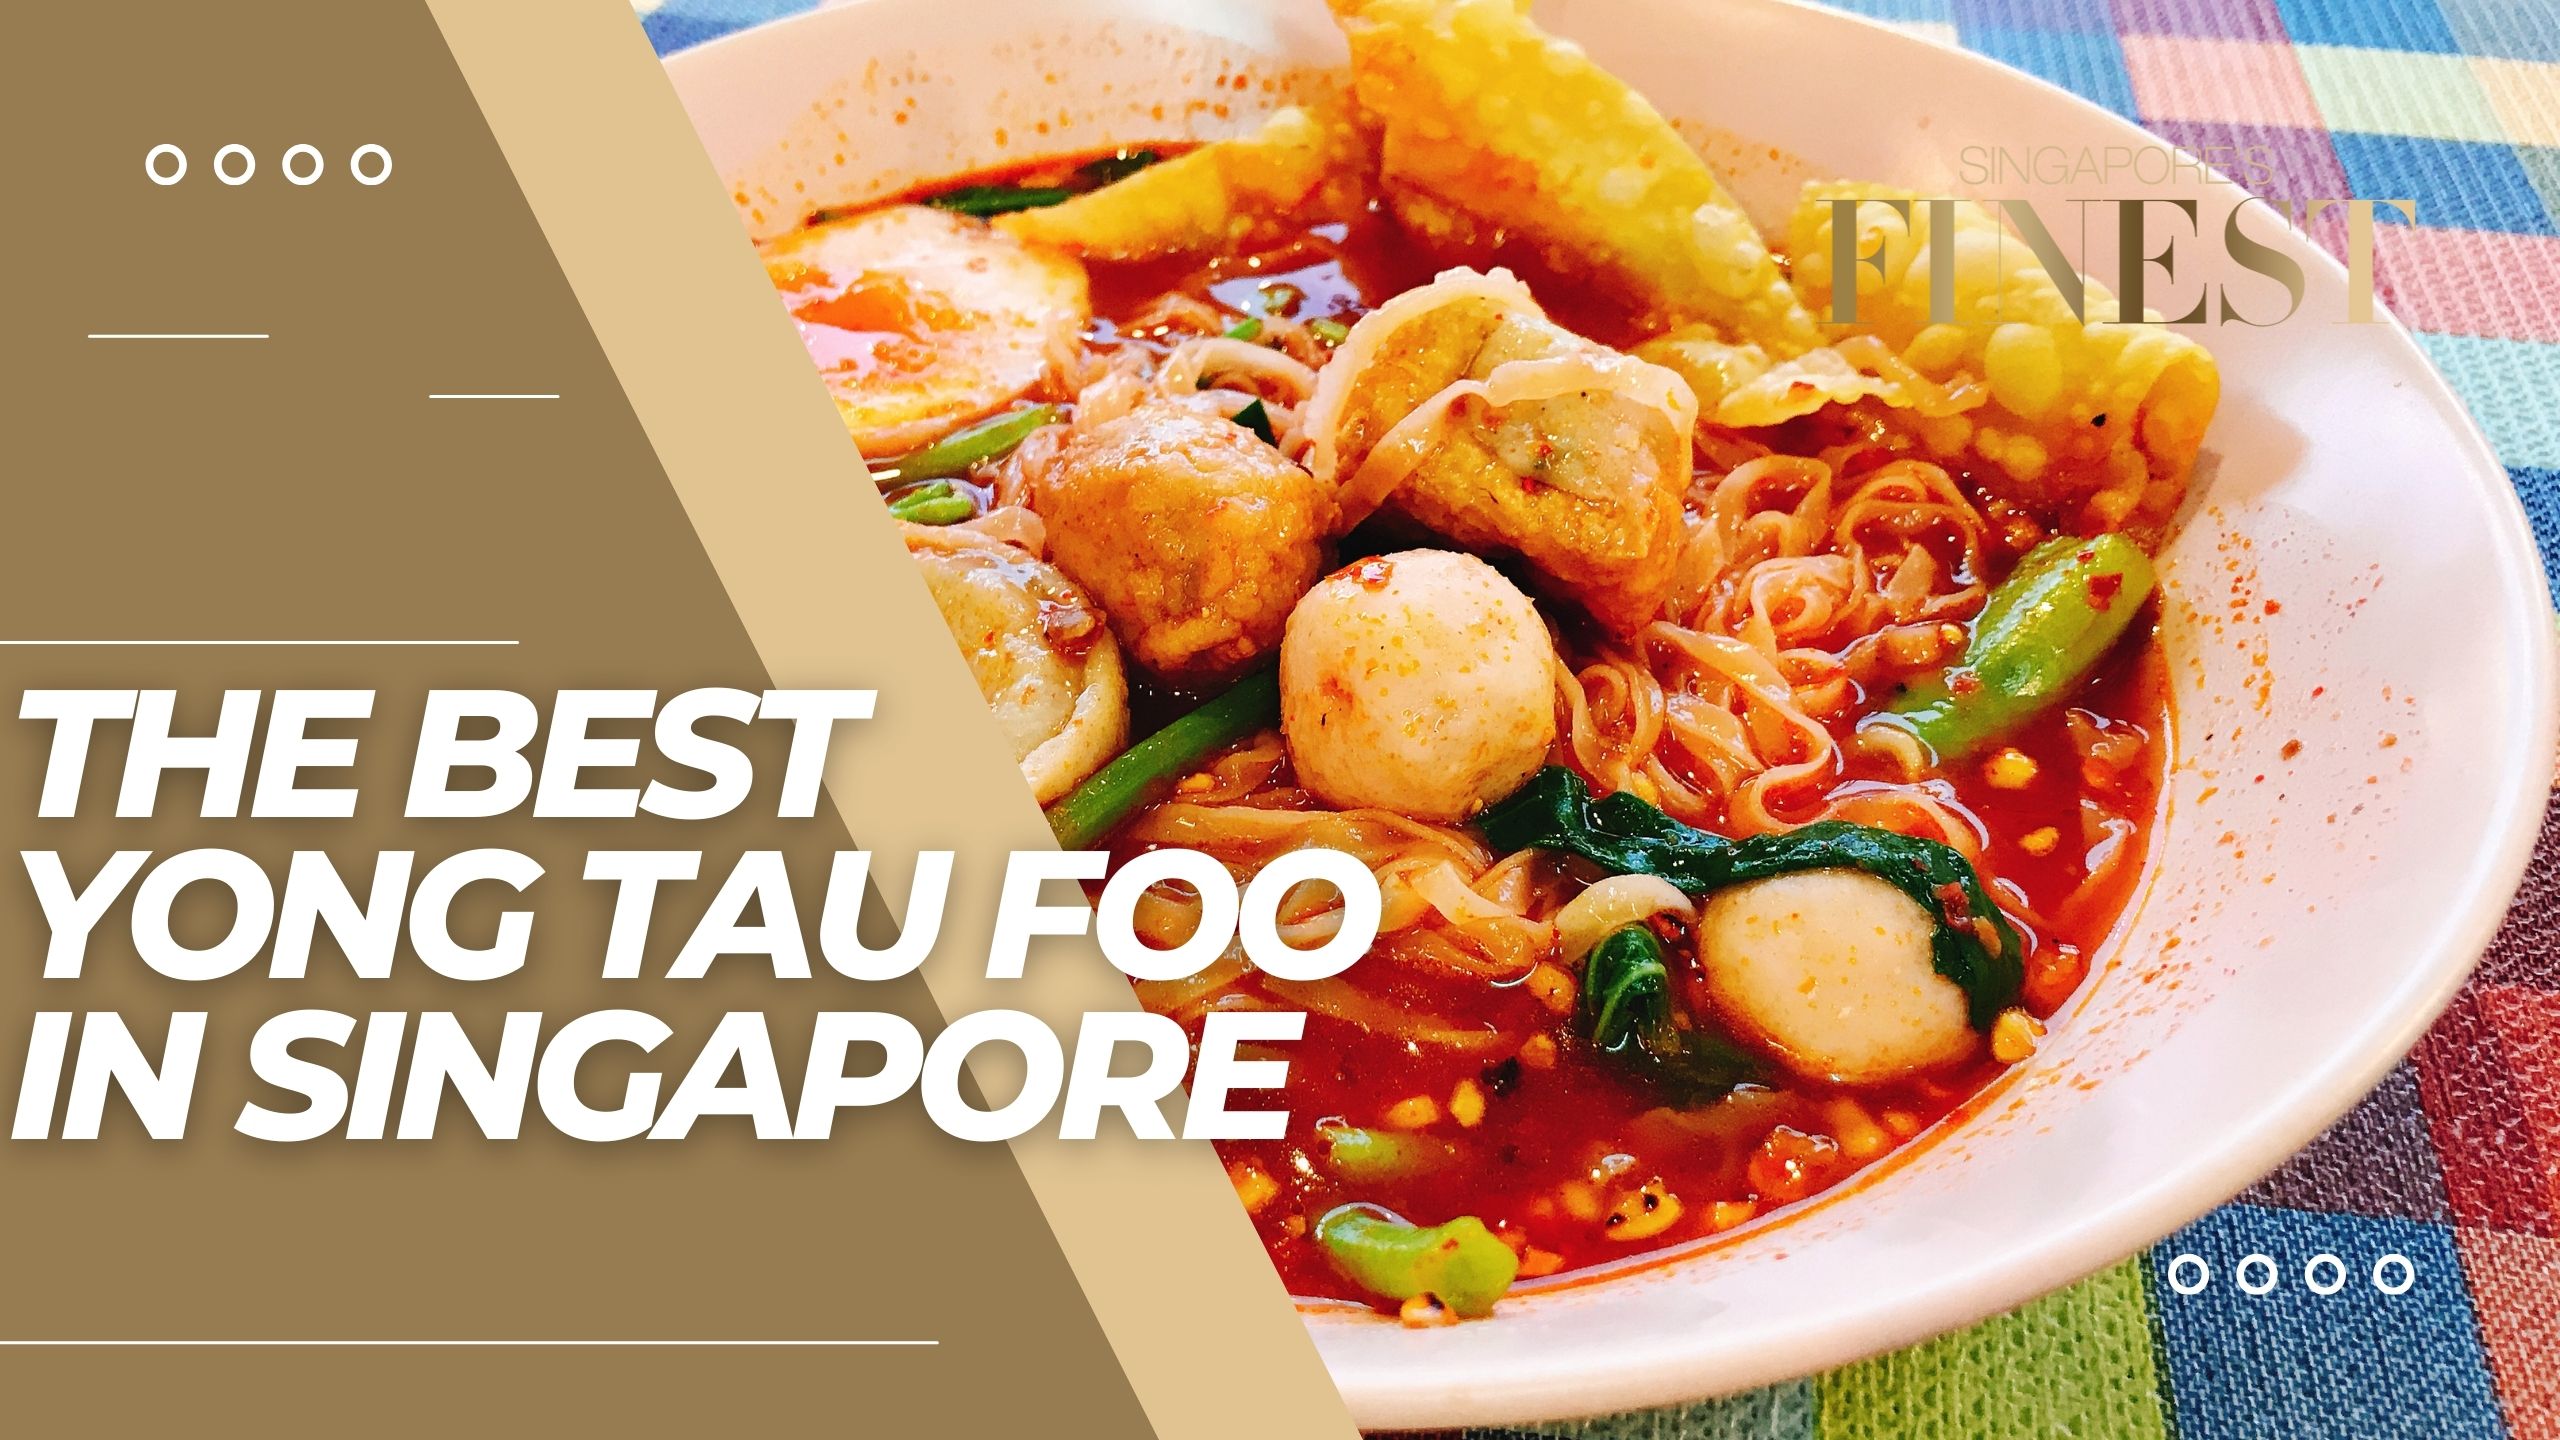 The Finest Yong Tau Foo in Singapore